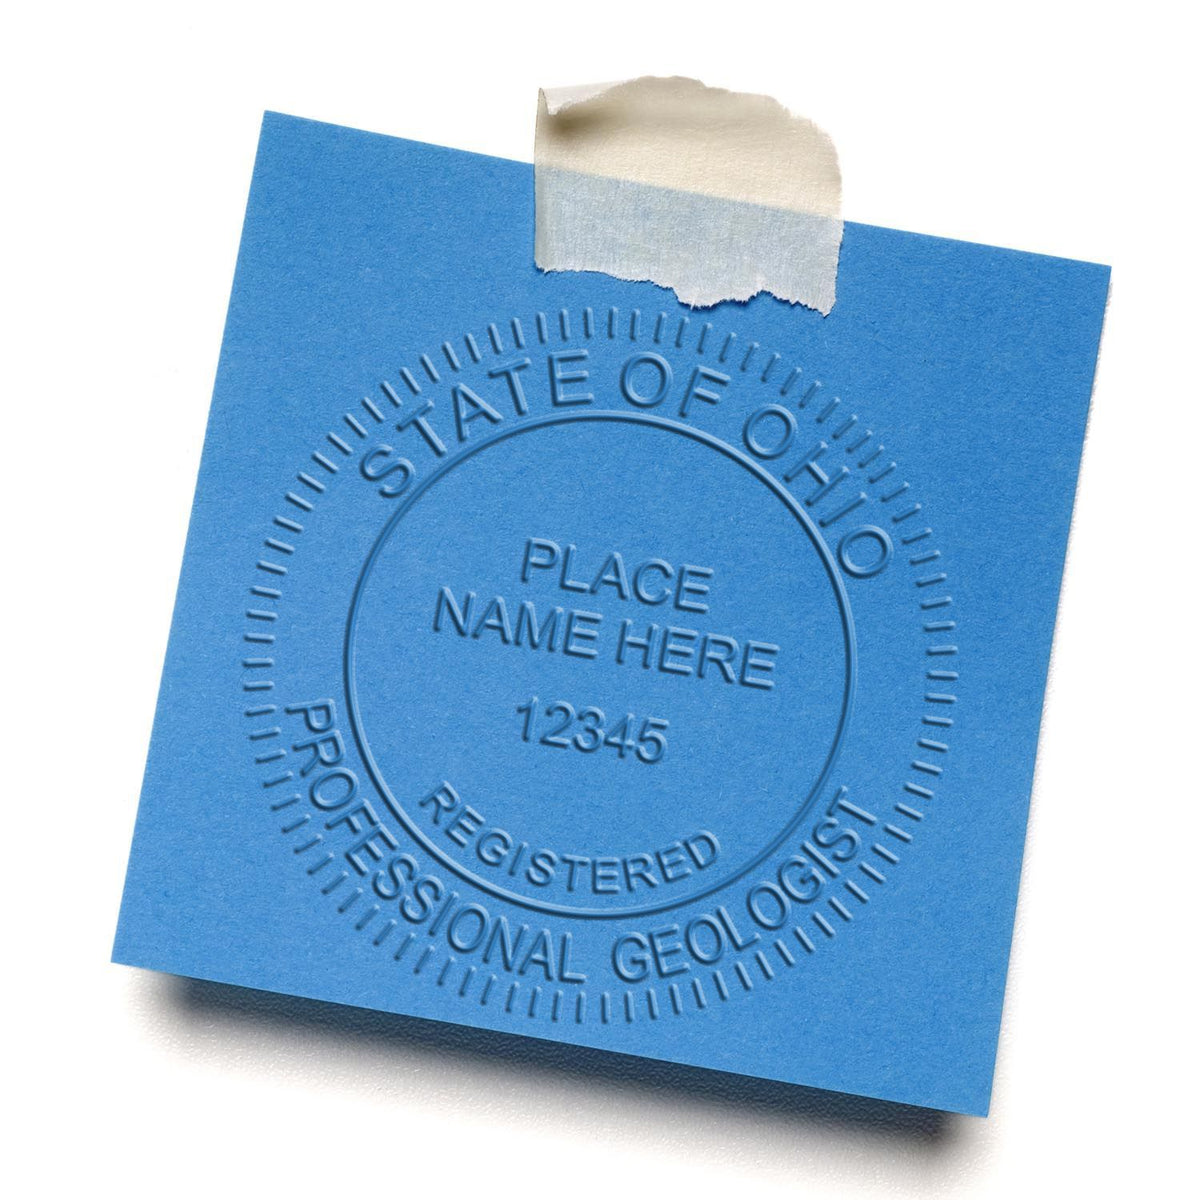 An in use photo of the Hybrid Ohio Geologist Seal showing a sample imprint on a cardstock